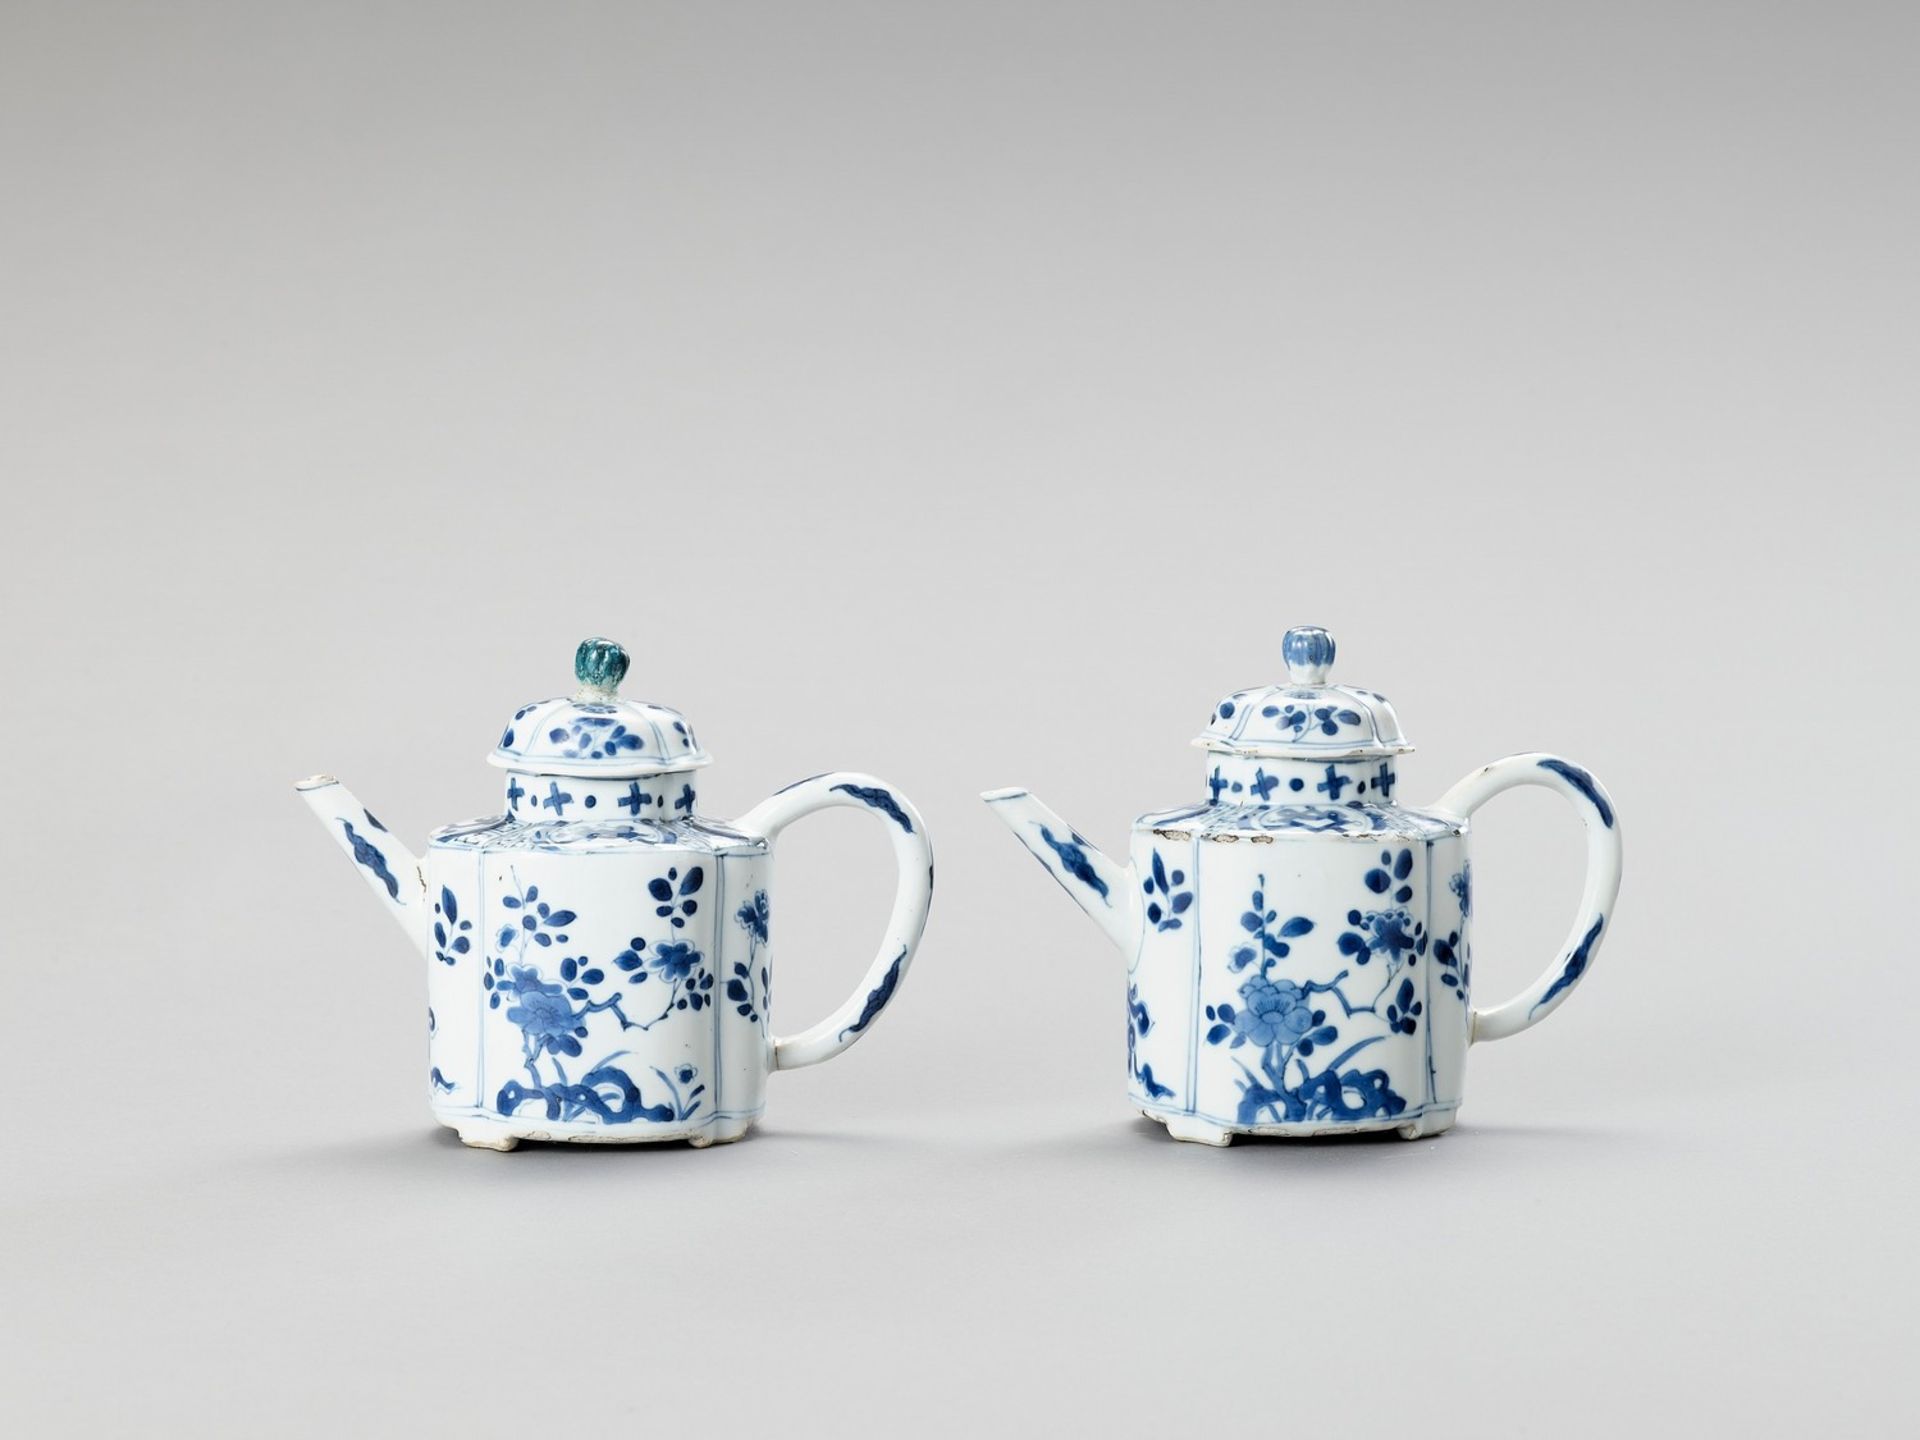 A PAIR OF BLUE AND WHITE PORCELAIN TEAPOTS